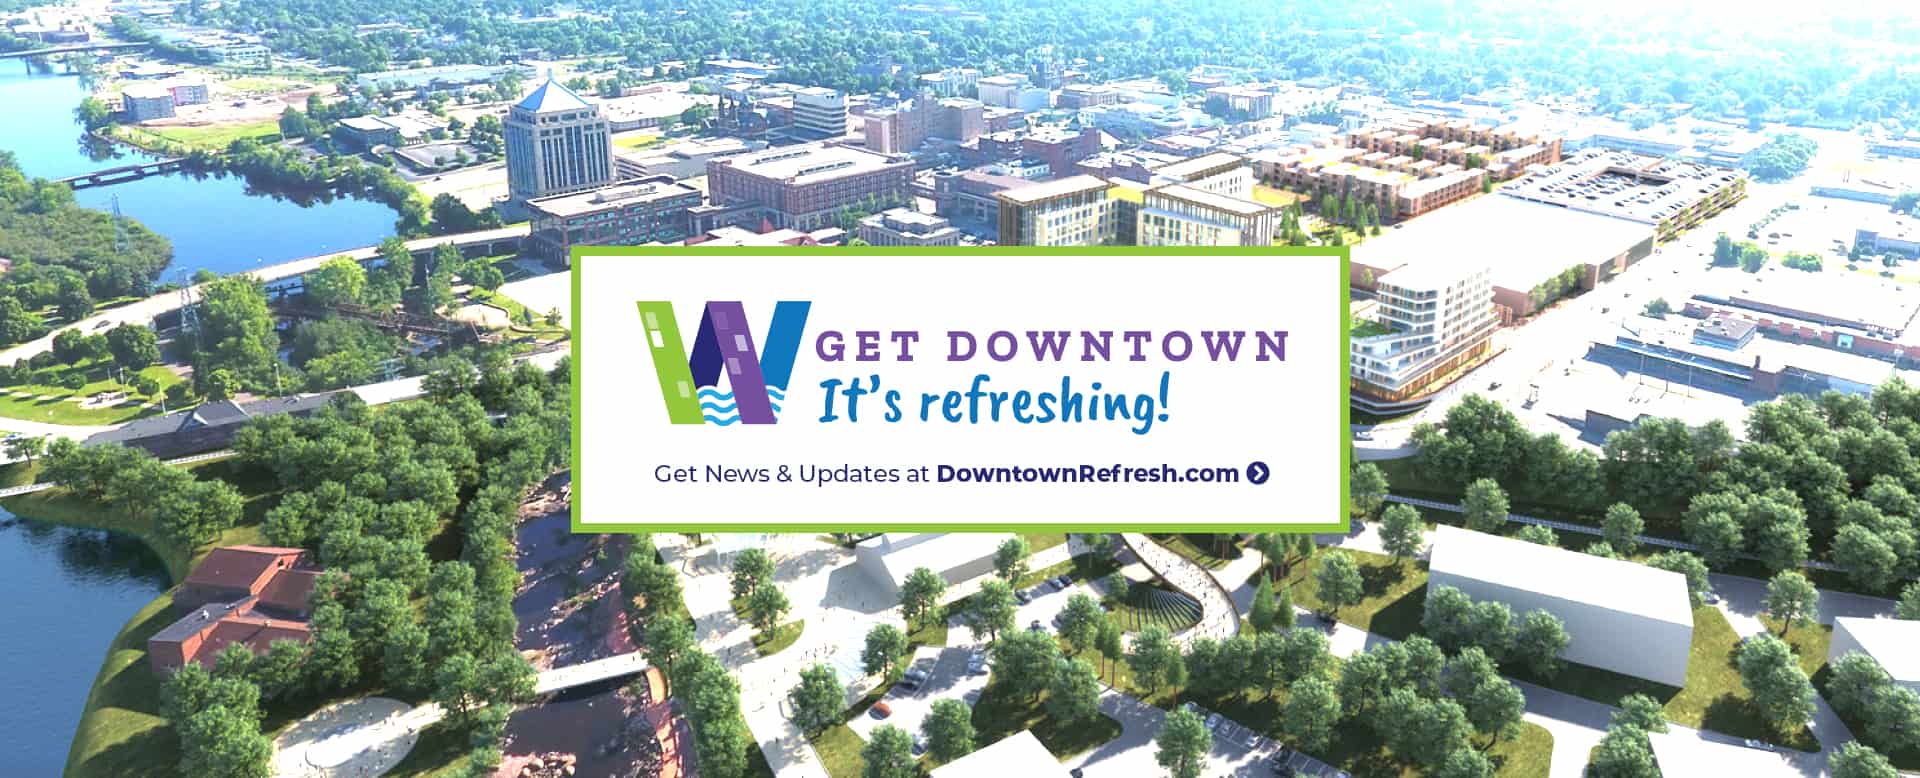 Wausau Center Mall demo campaign Get Downtown. It's Refreshing!